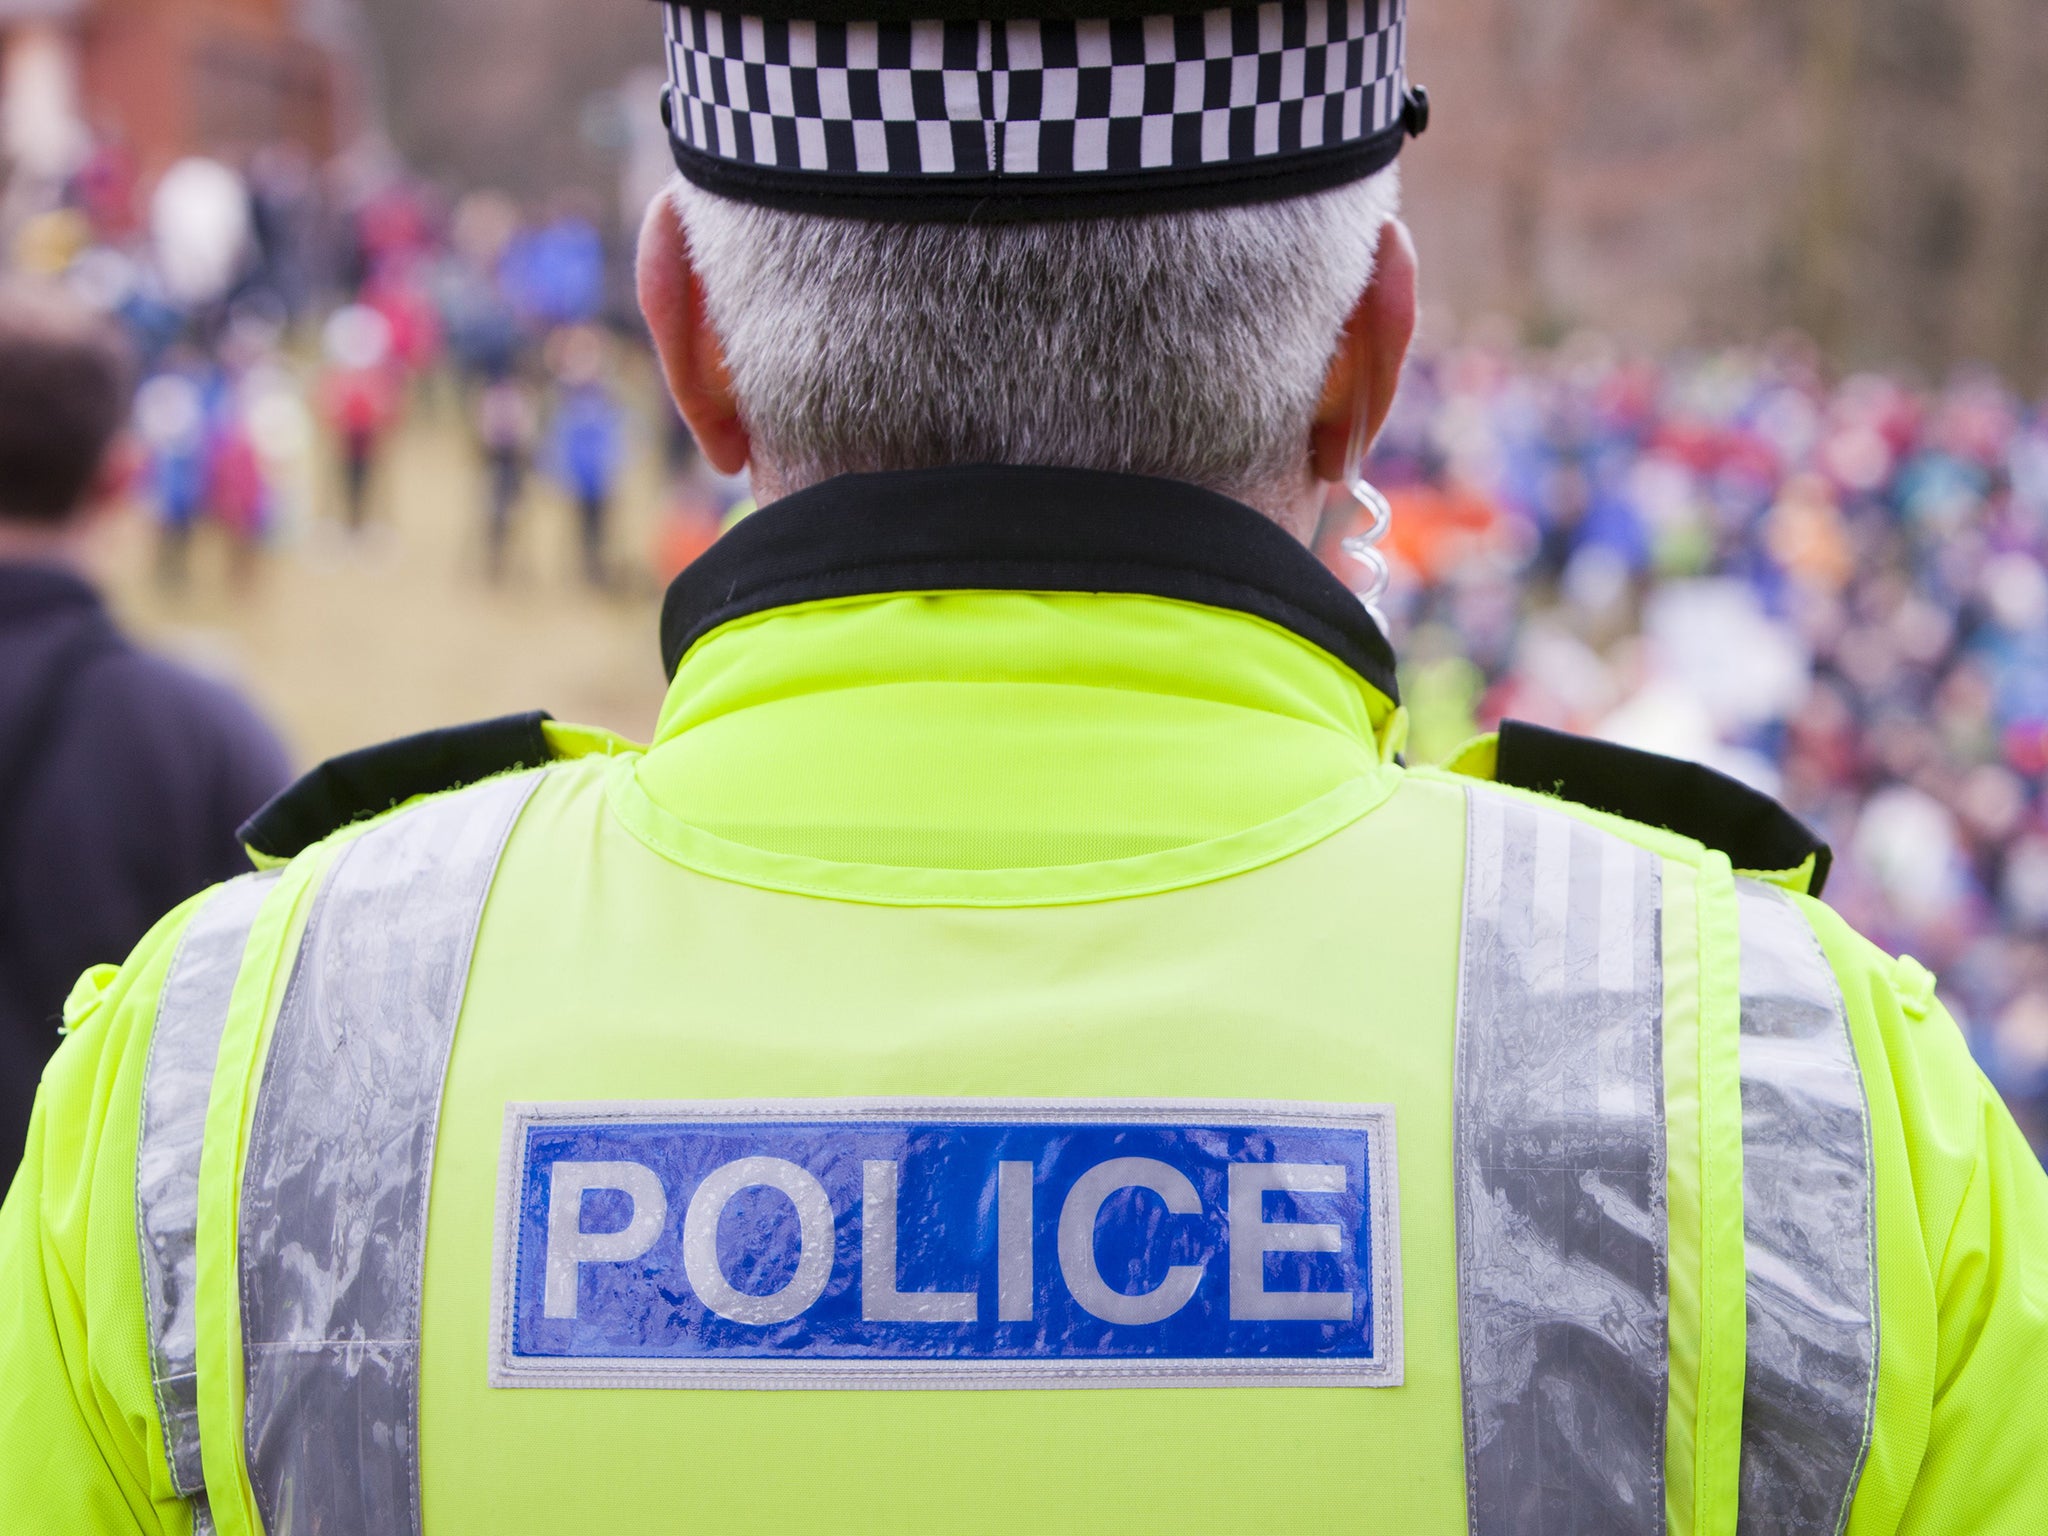 West Midlands Police said 80 per cent of its operating costs comes from wages